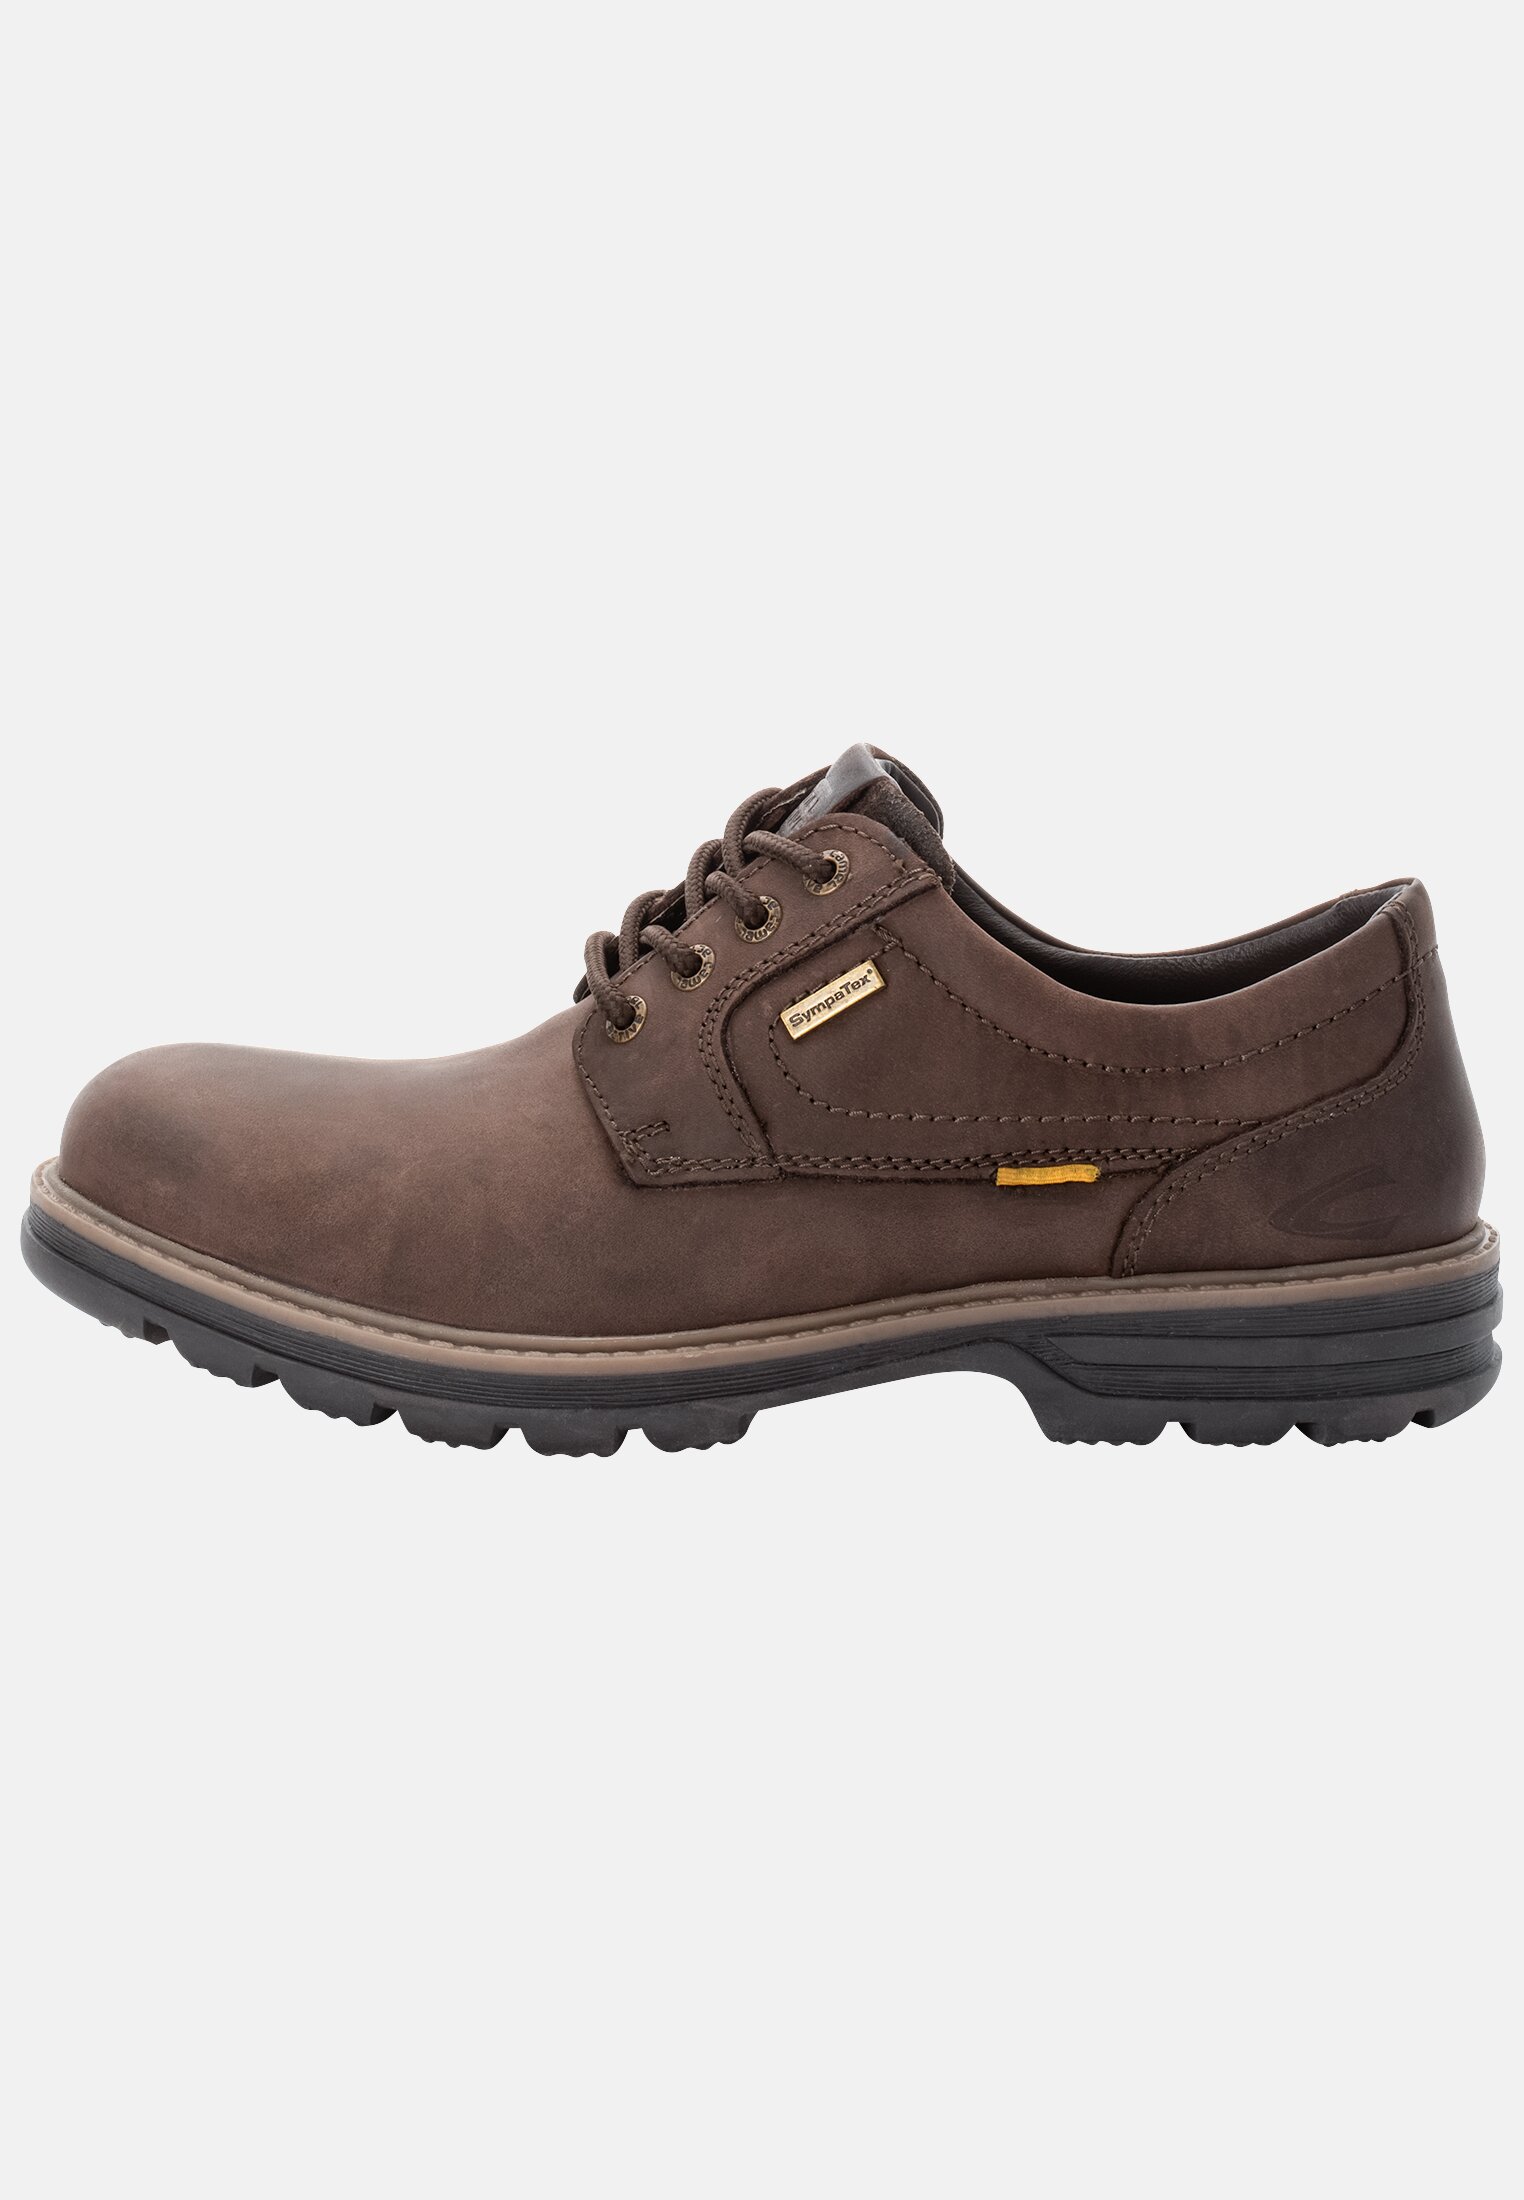 Camel Active Lace-up shoes made of genuine nubuck leather